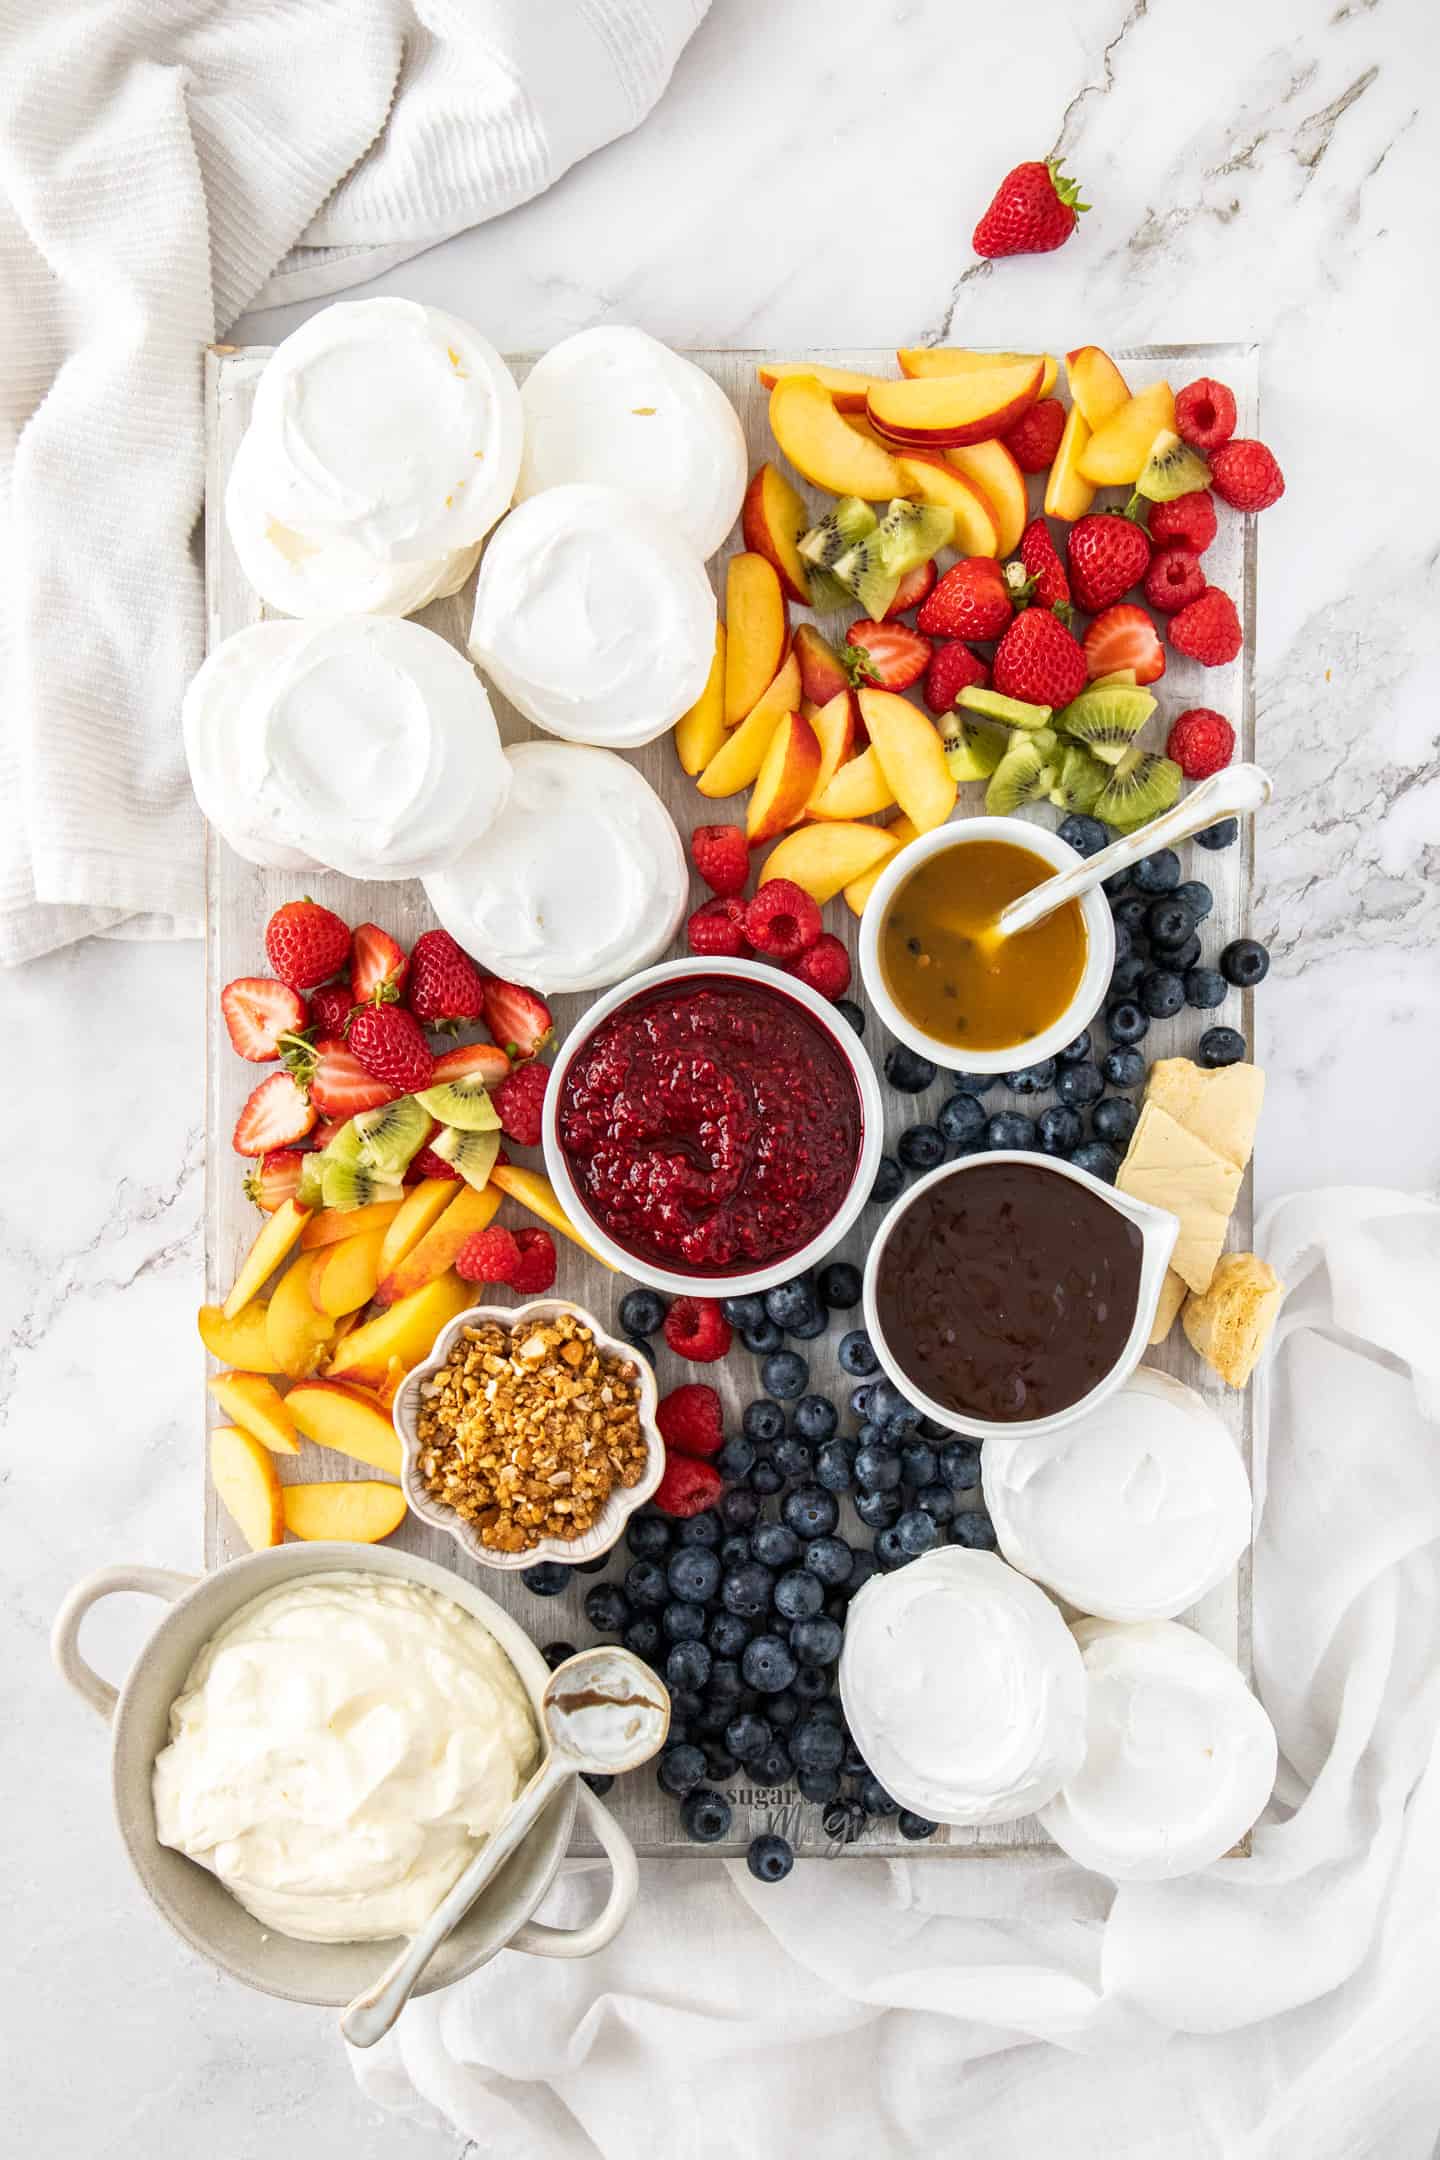 Top down view of a board filled with meringues, fruit and sauces.